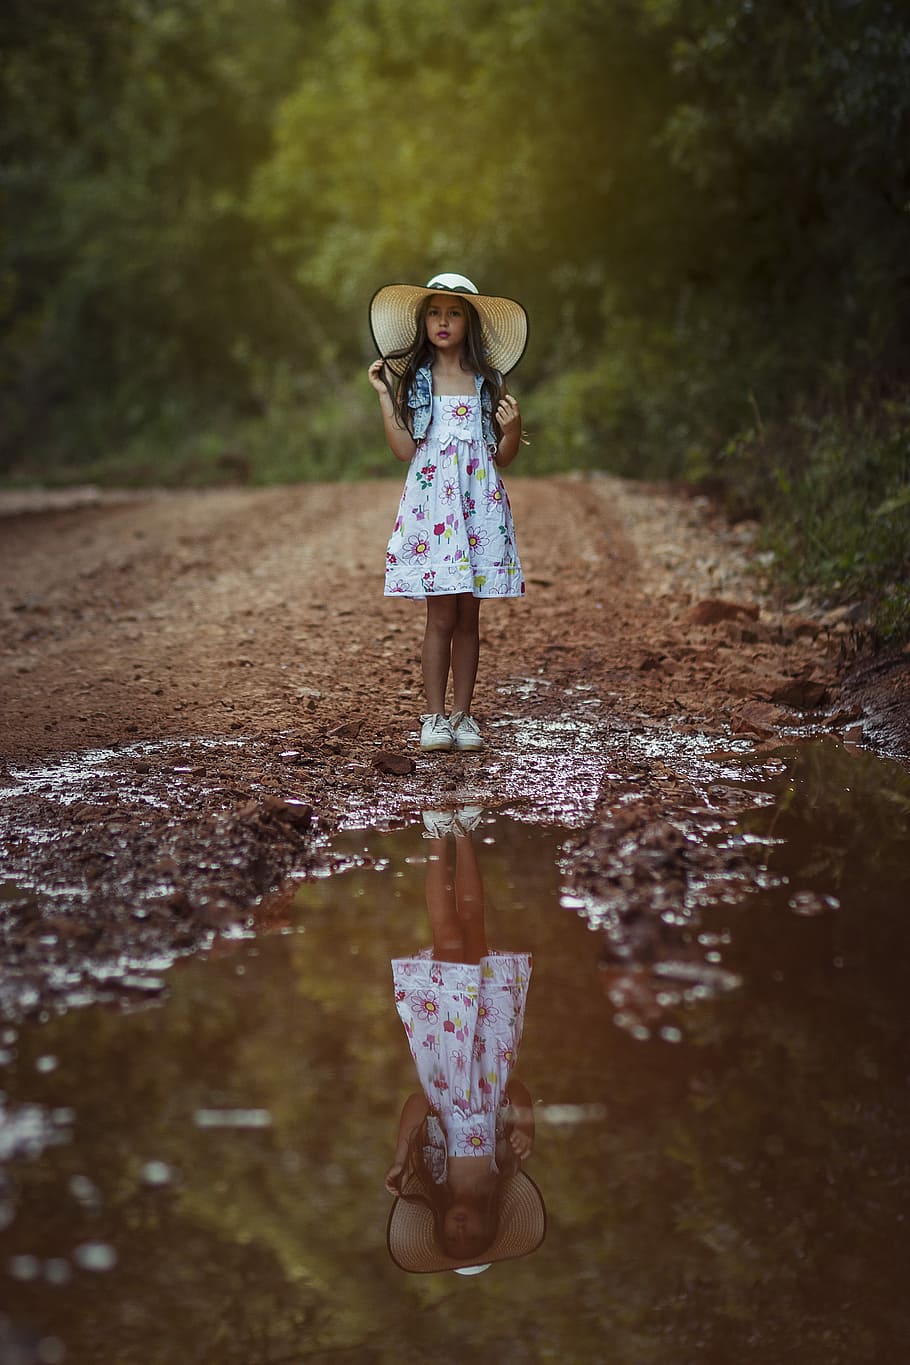 girl standing in front body of water, girl holding hair standing on dirt near road surrounded by trees during daytime